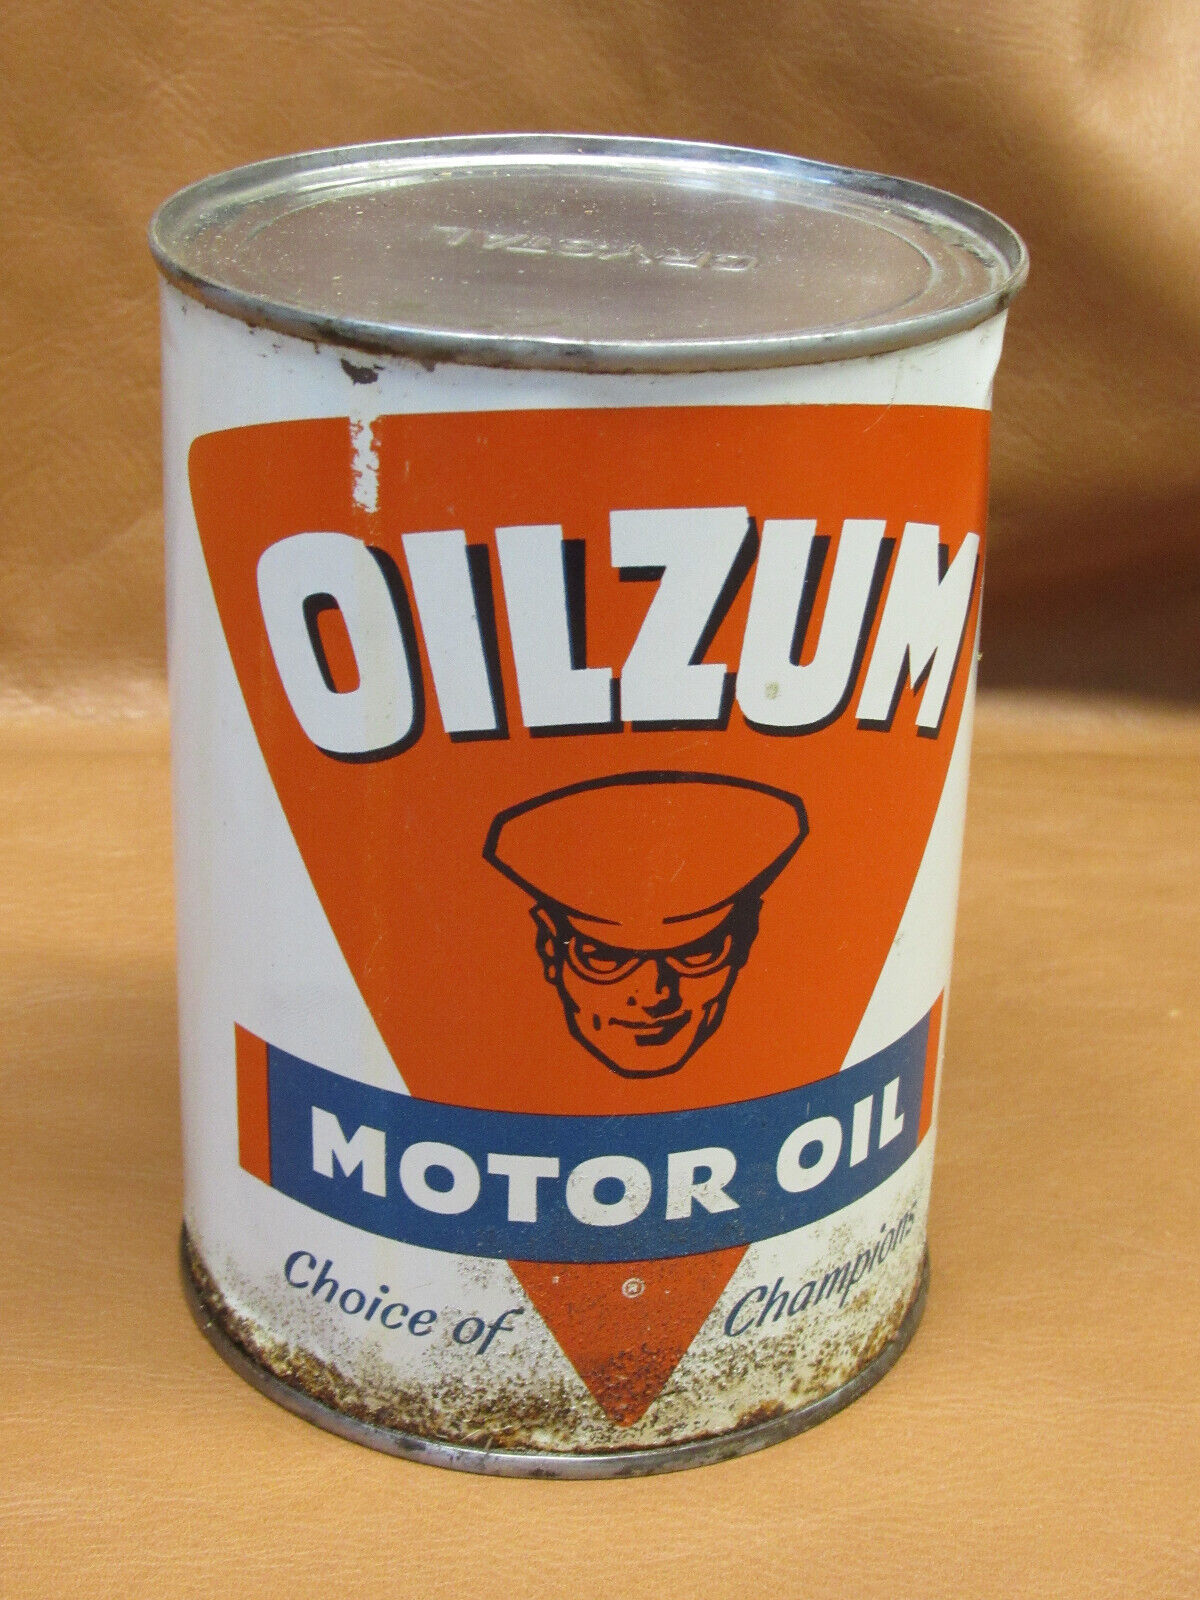 Oilzum Crystal Motor Oil Can Unopened Quart Tin Litho Not Paper Label 1950s